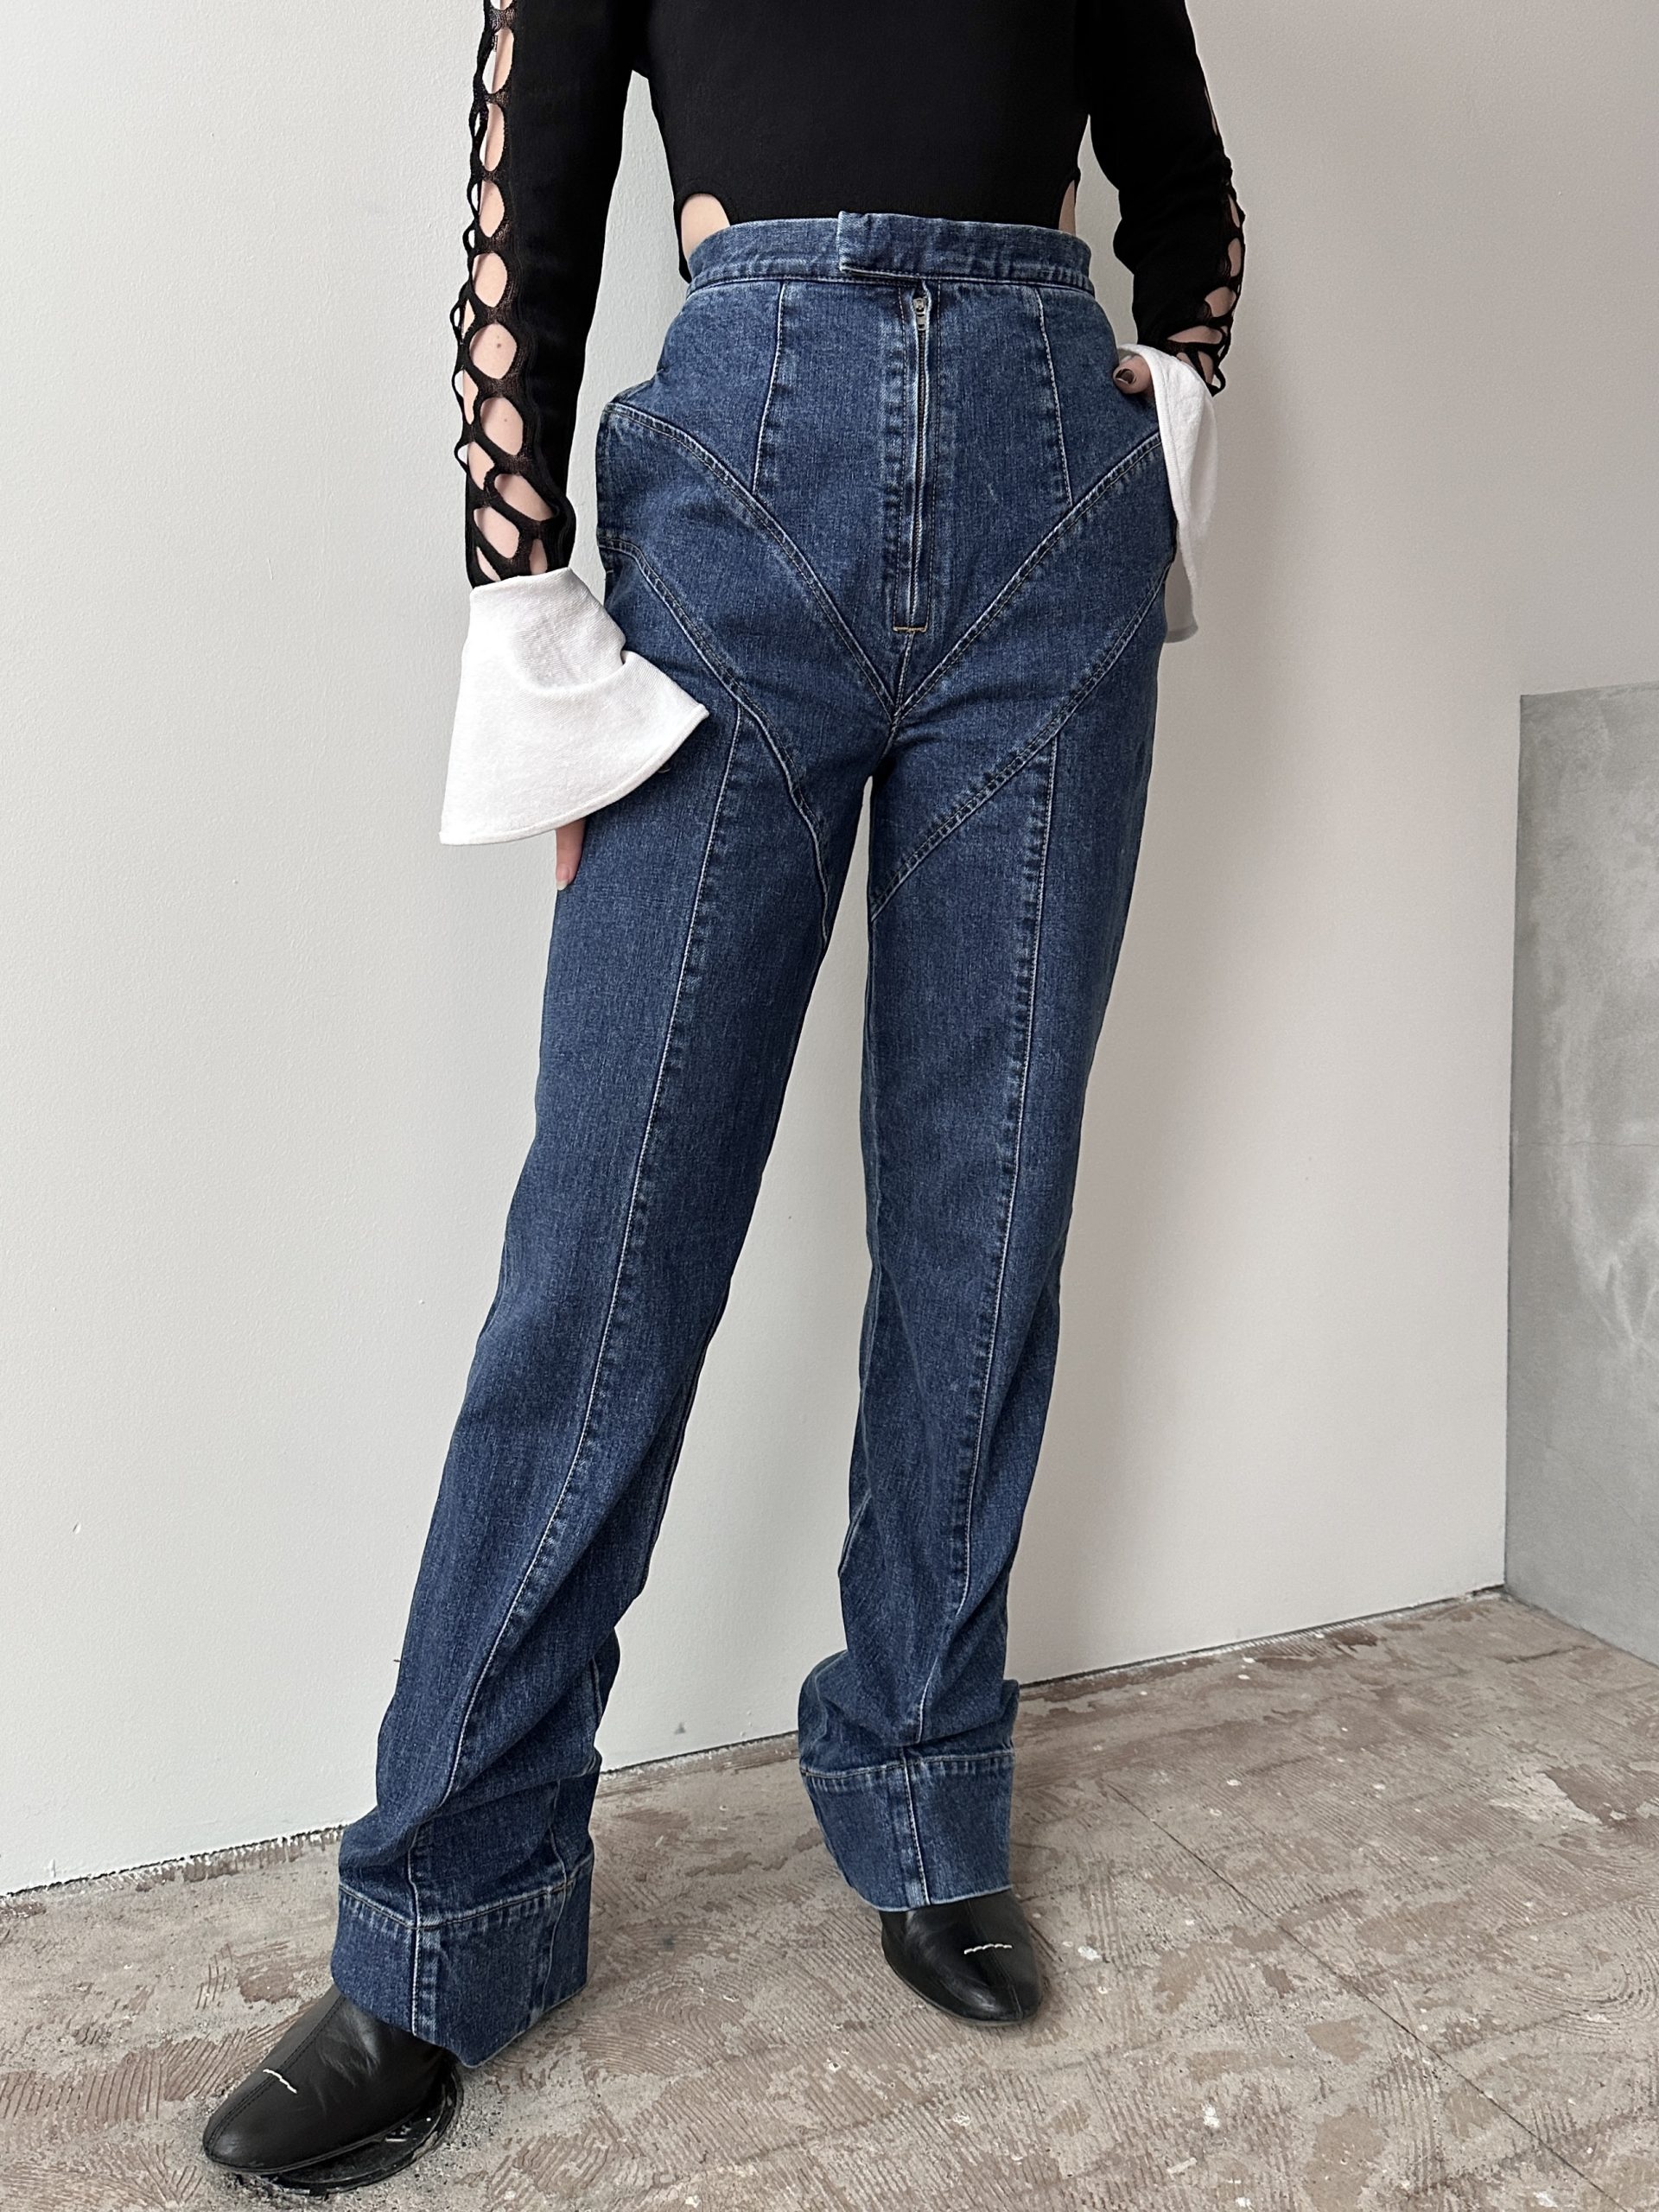 【FETICO】WASHED HIGH RISE STRAIGHT JEANS